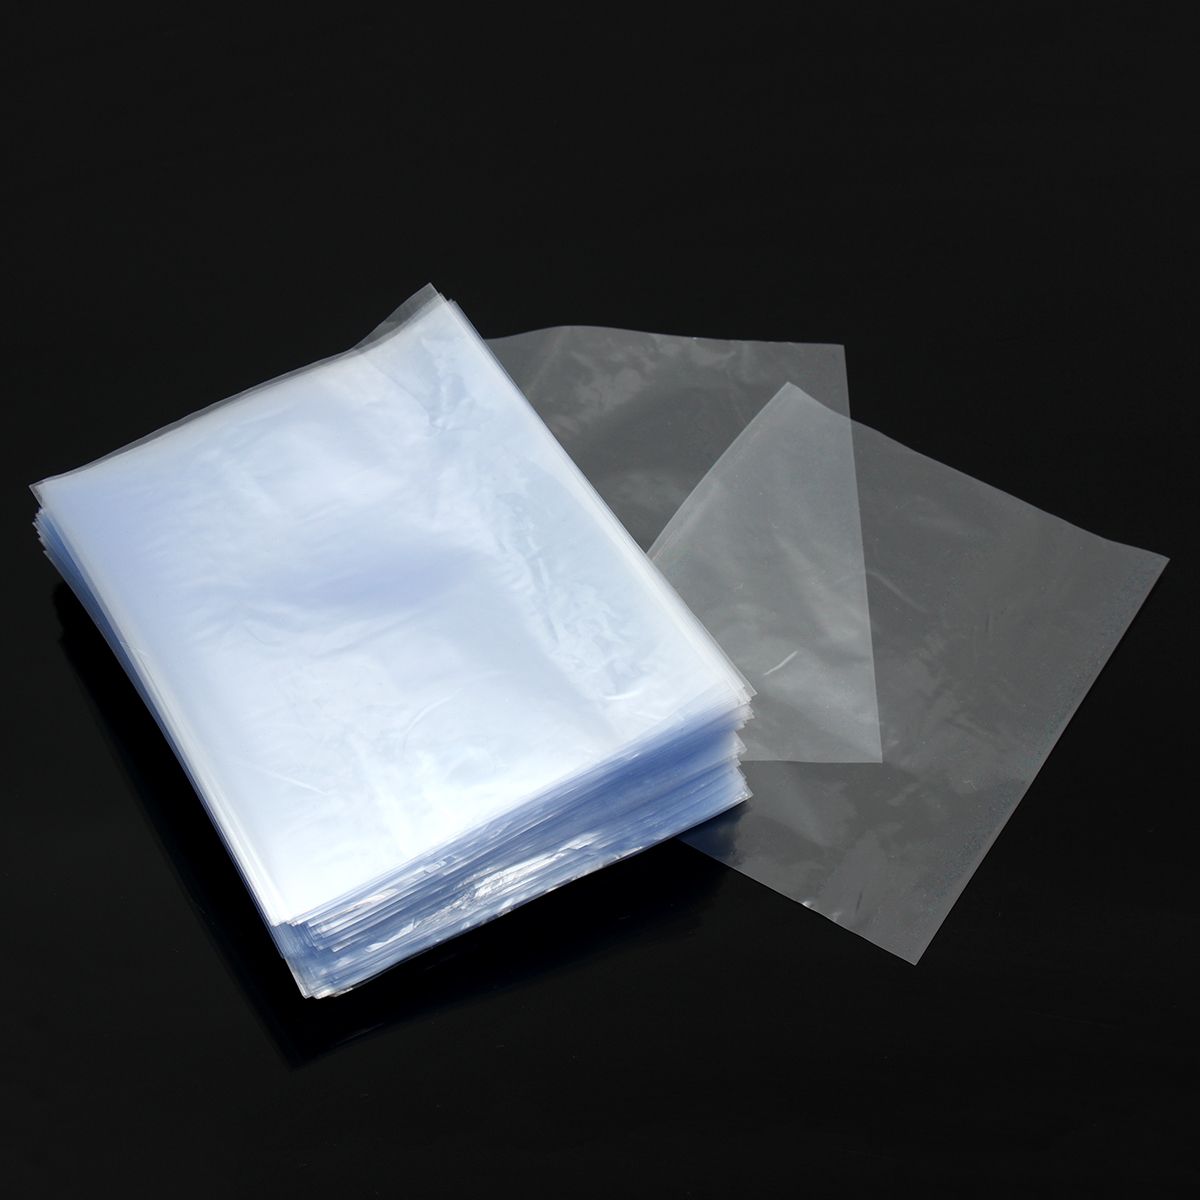 200Pcs-PVC-Heat-Shrink-Wrap-Bags-Clear-Film-DIY-Crafts-Gifts-Bottle-Packaging-Bags-1197111